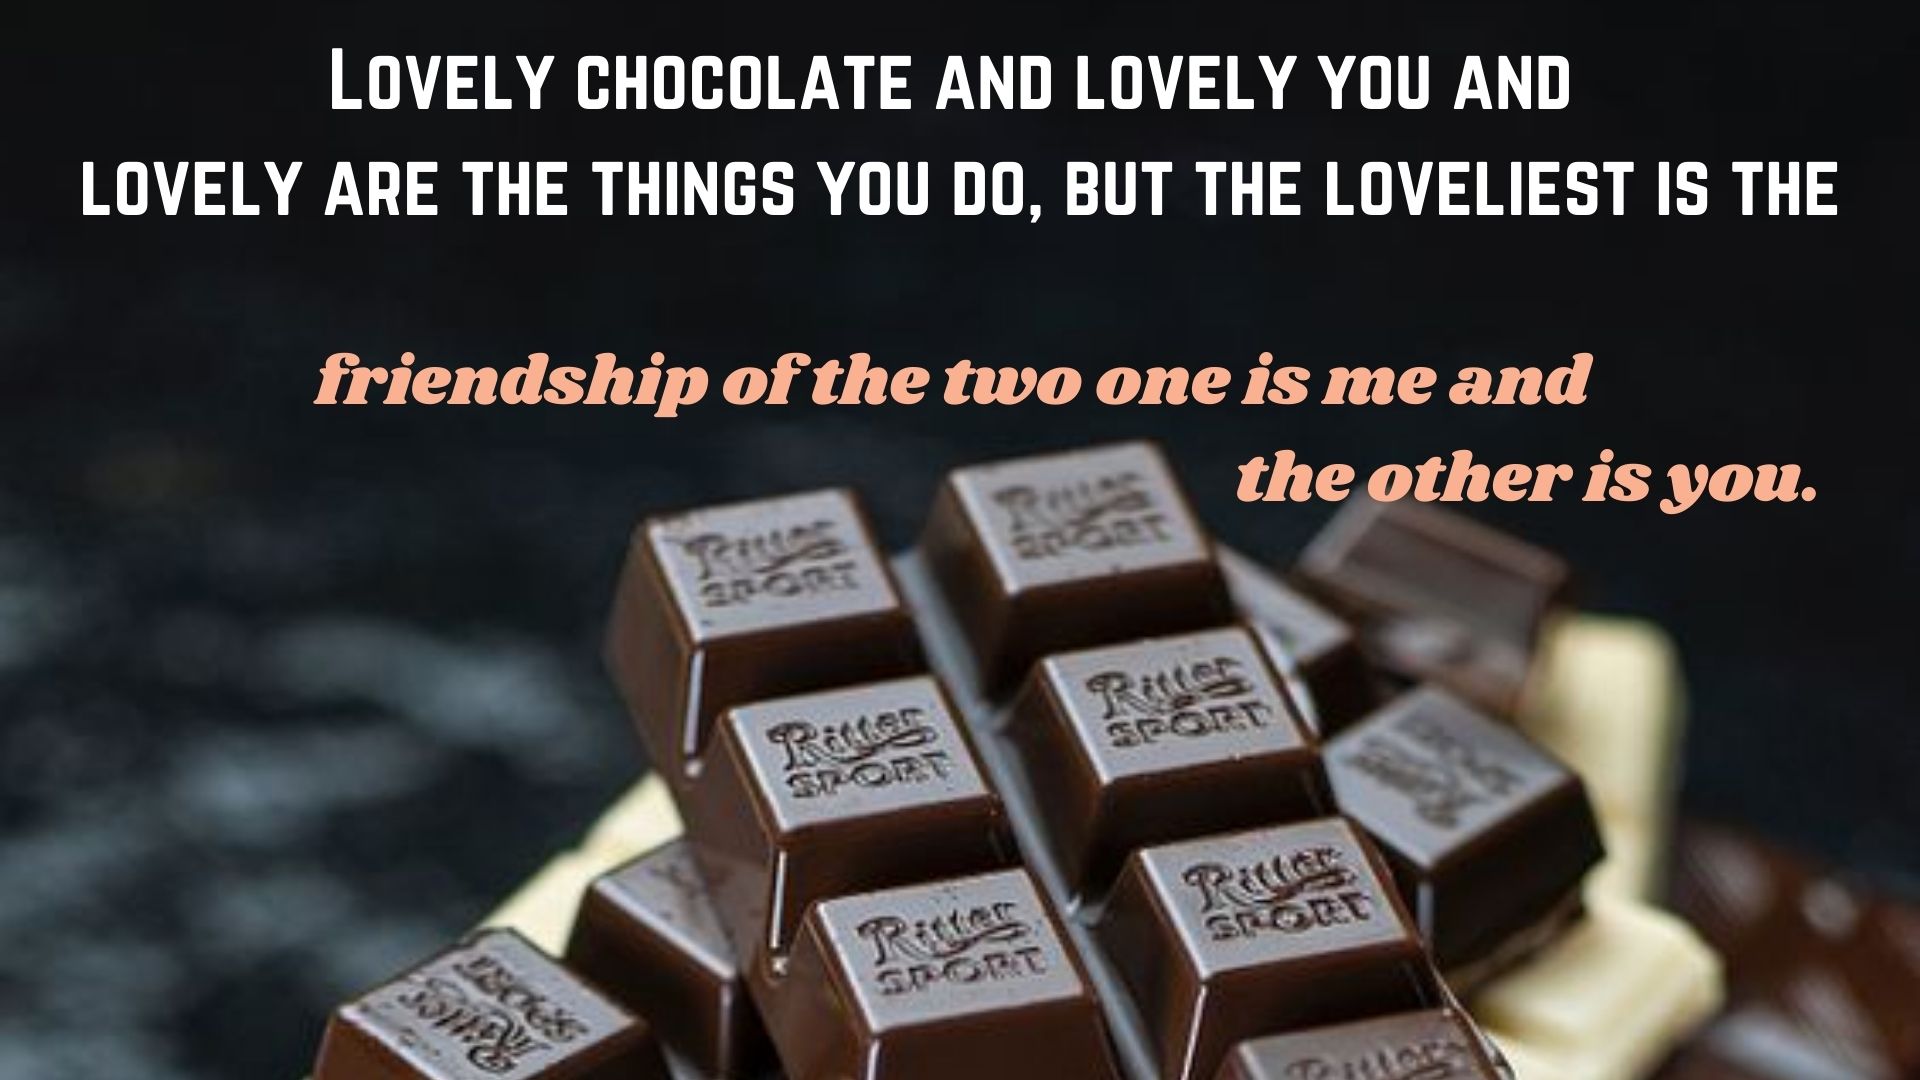 about chocolate quotes